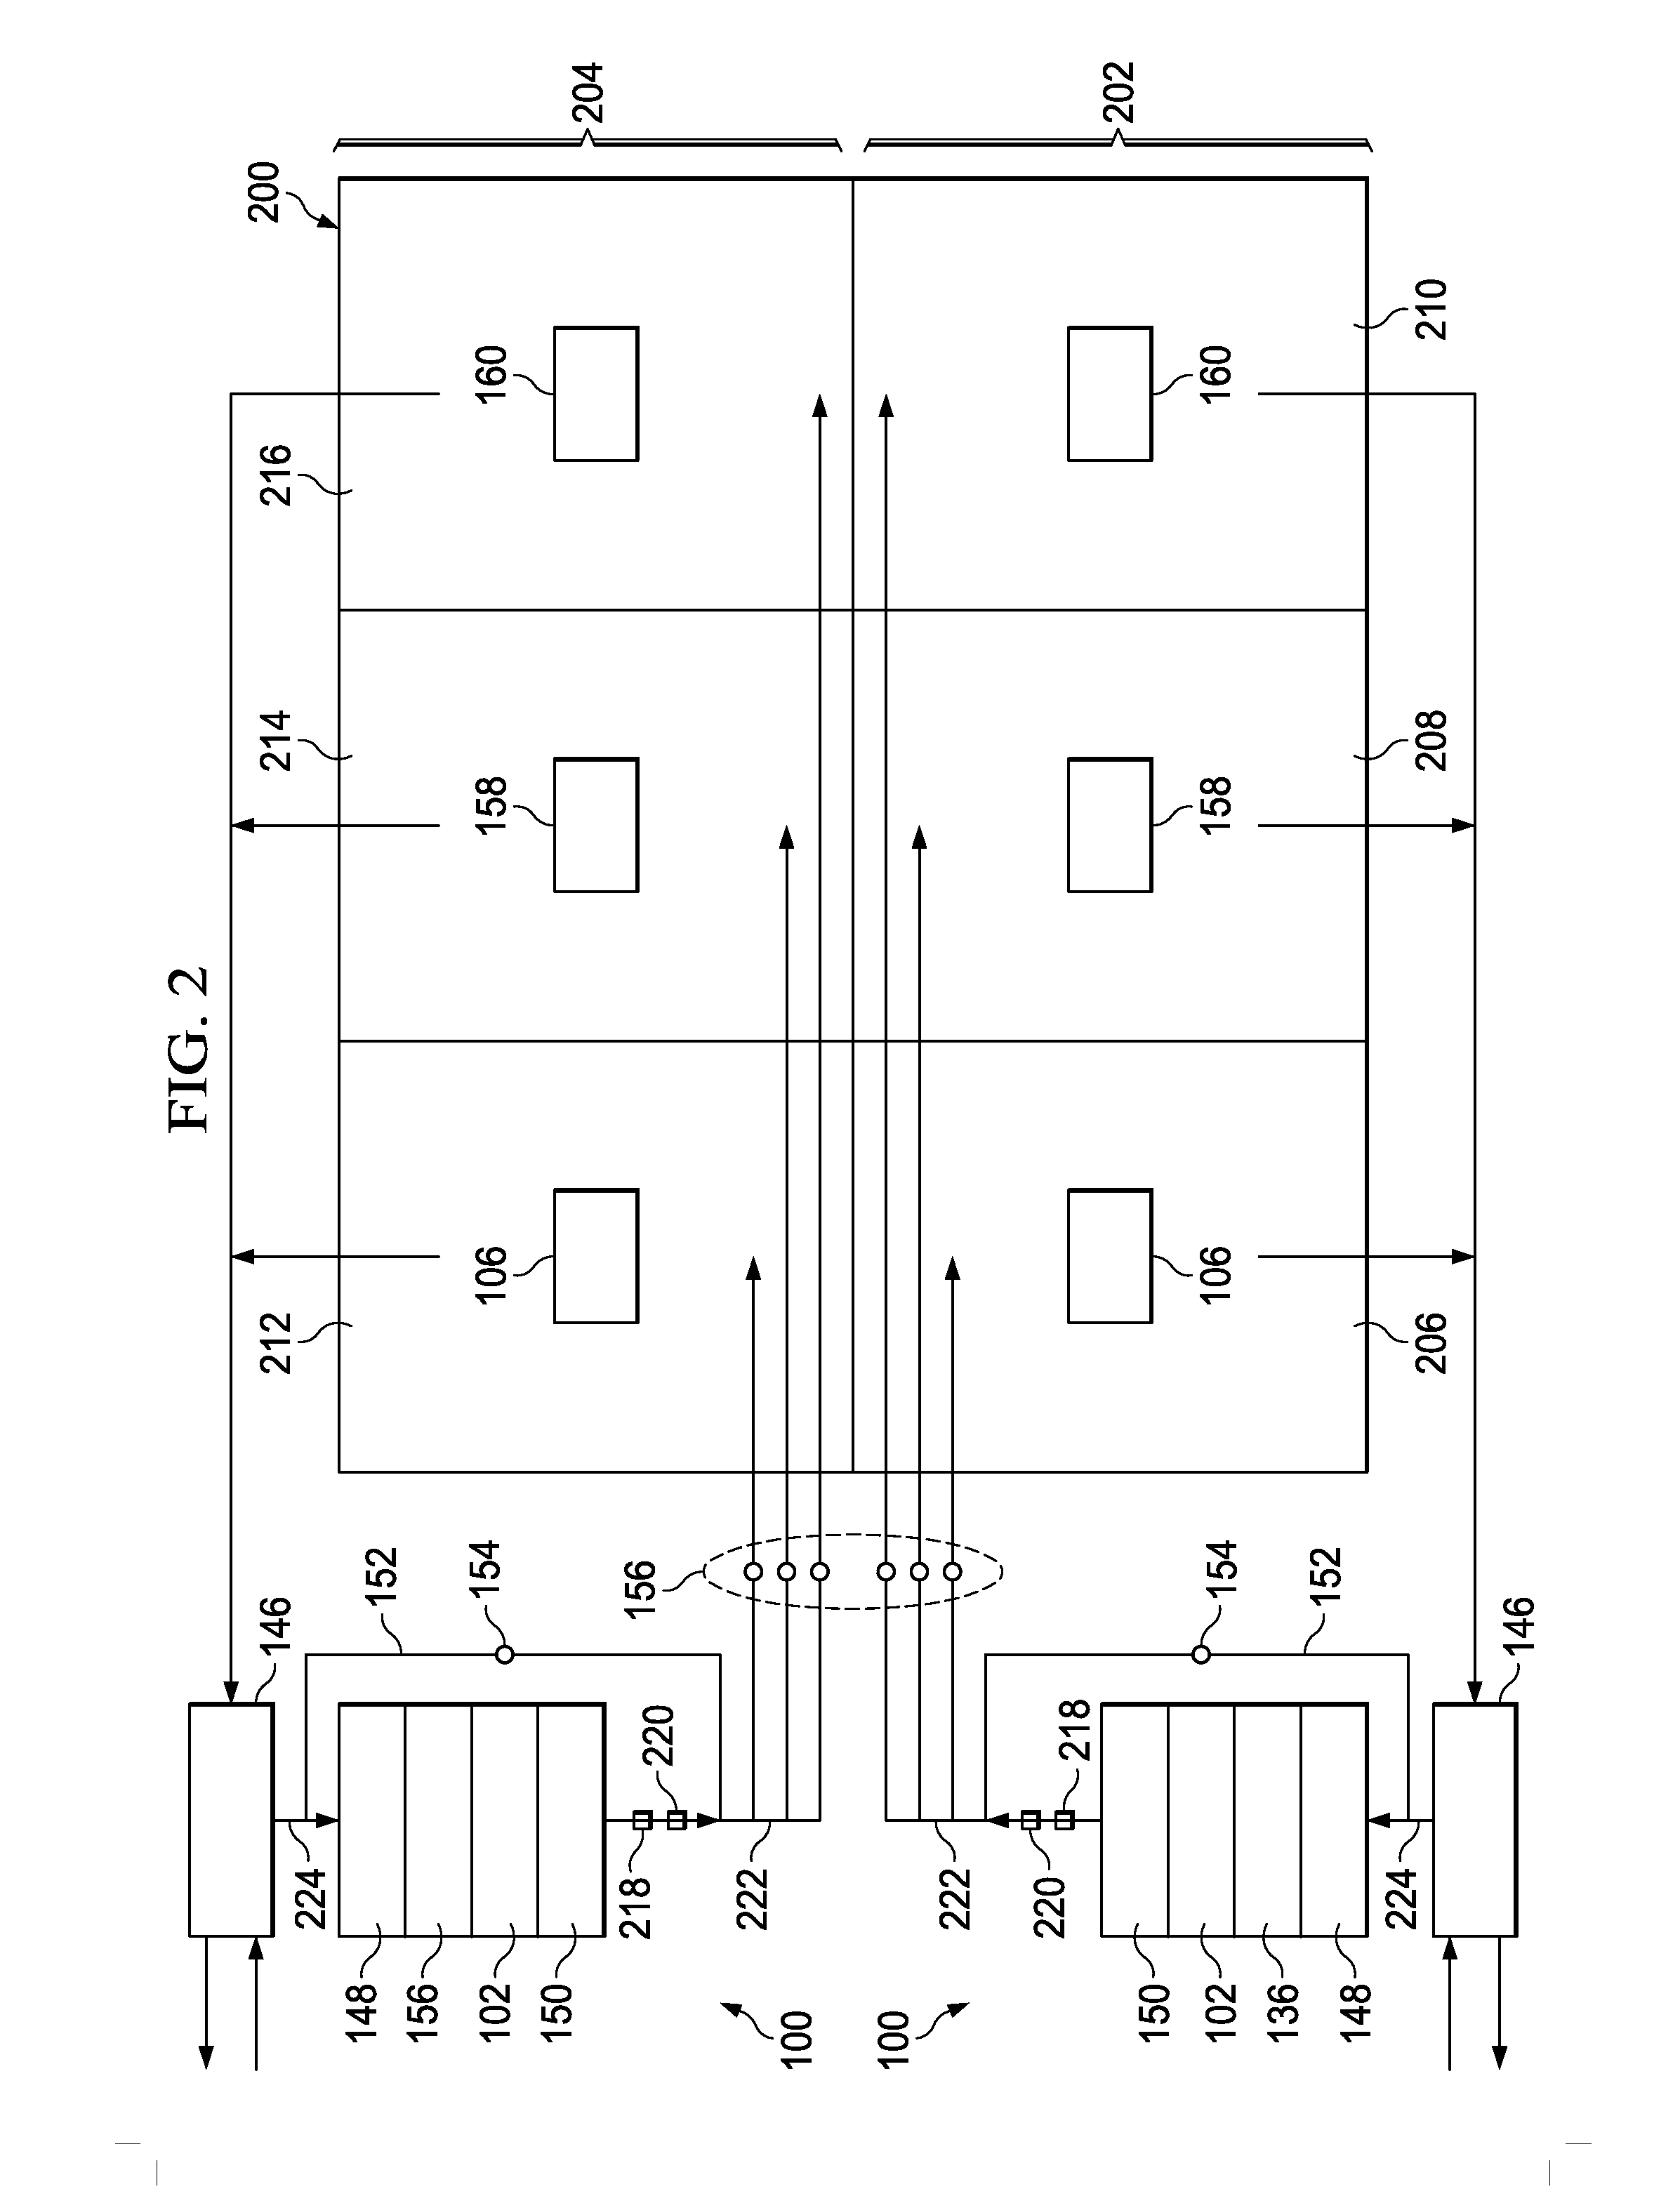 System and Method for Managing HVAC Excess Air Condition